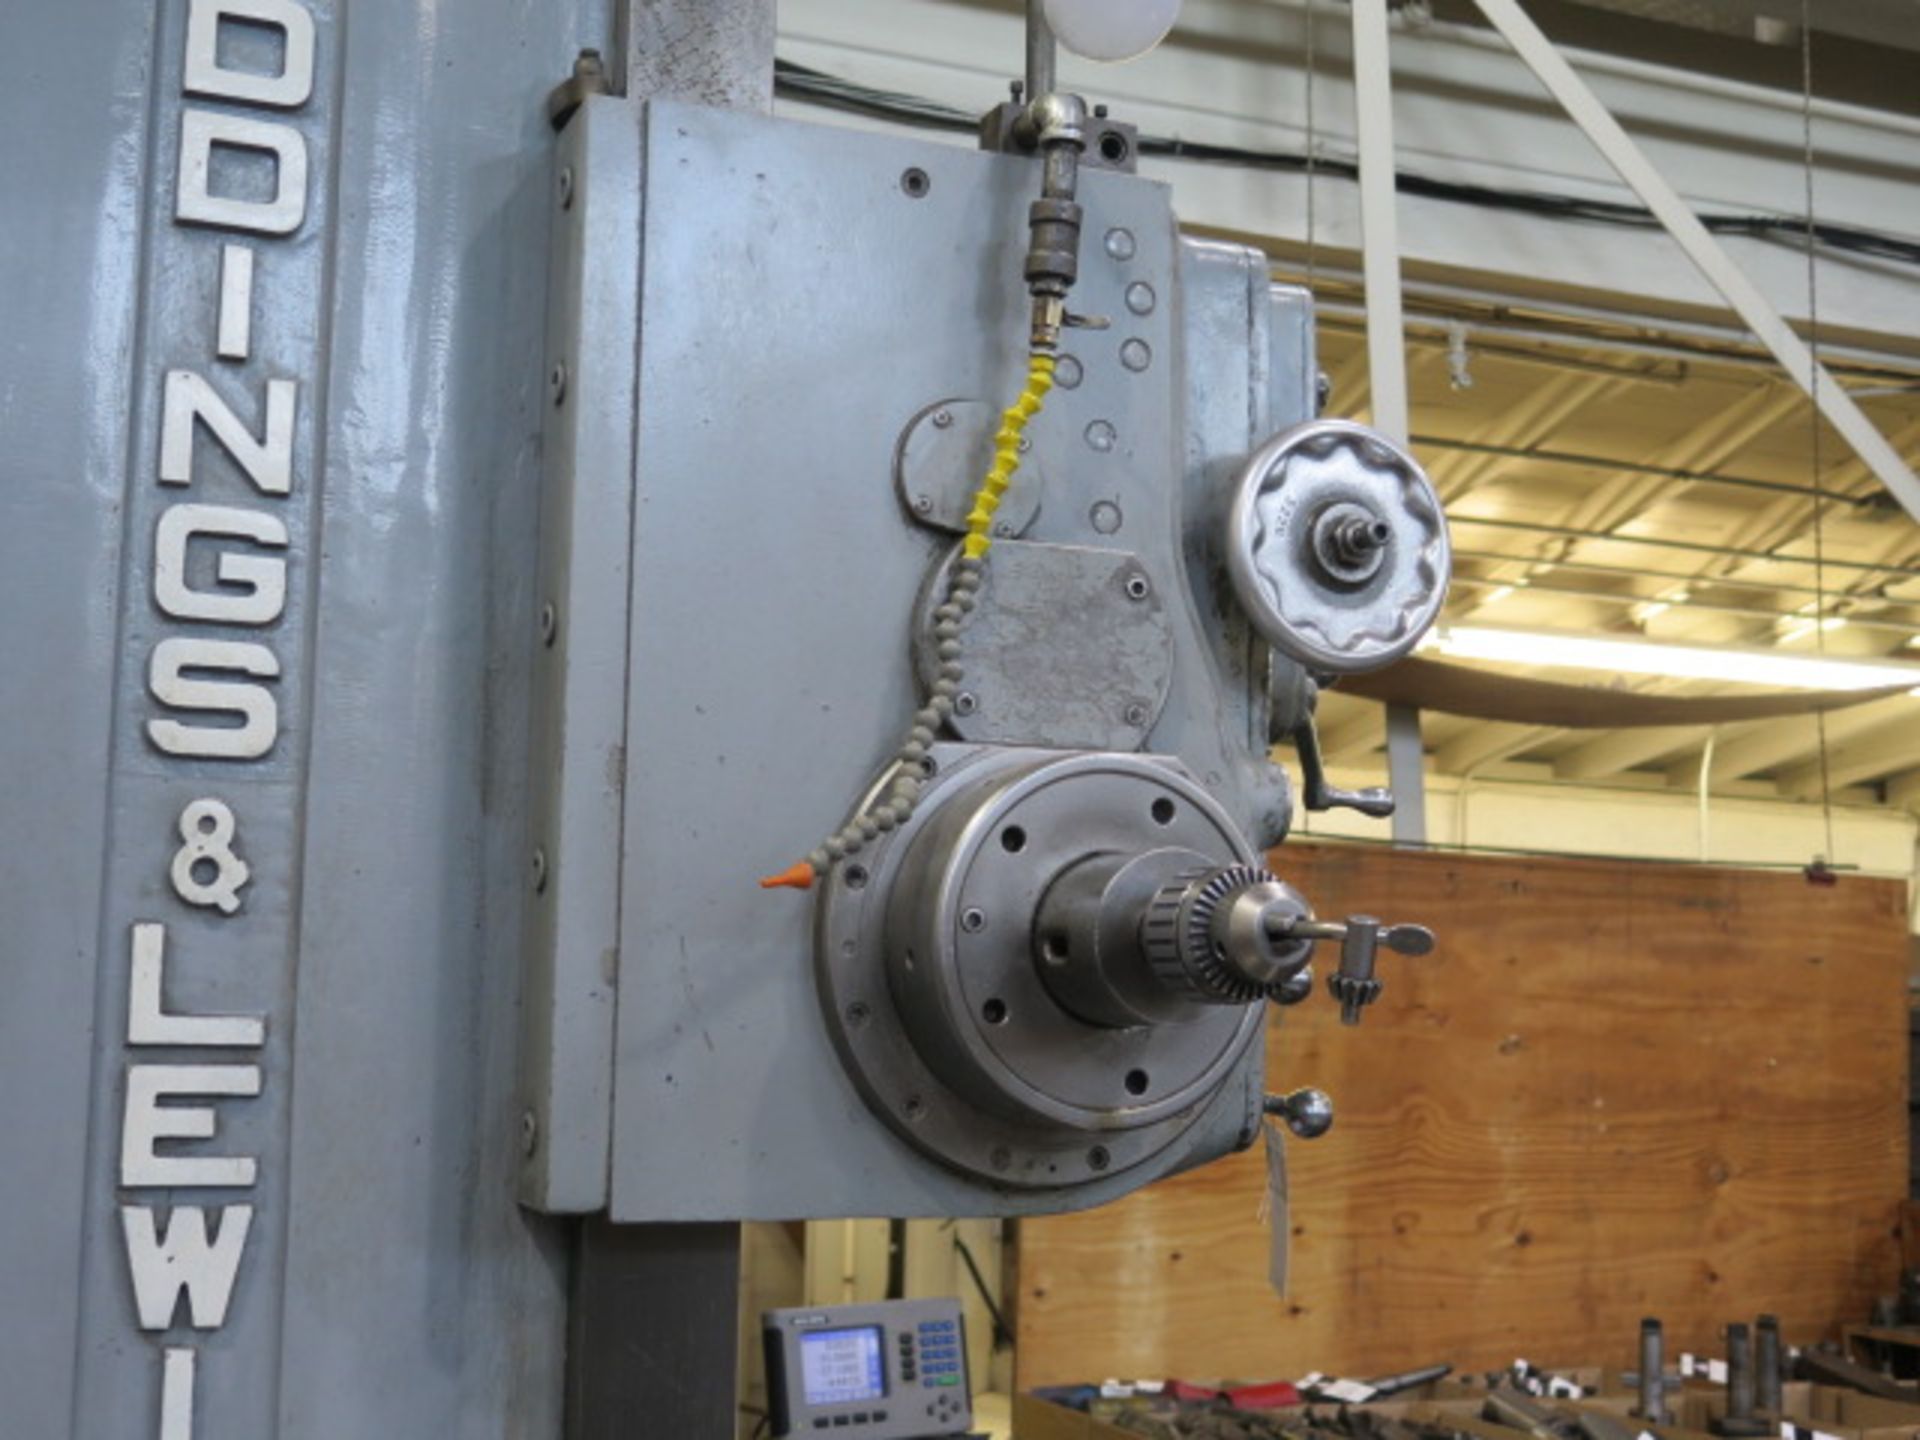 Giddings & Lewis 340-T Horizontal Boring Mill w/ Acu-Rite 4-Axis DRO, 4” Spindle, SOLD AS IS - Image 14 of 16